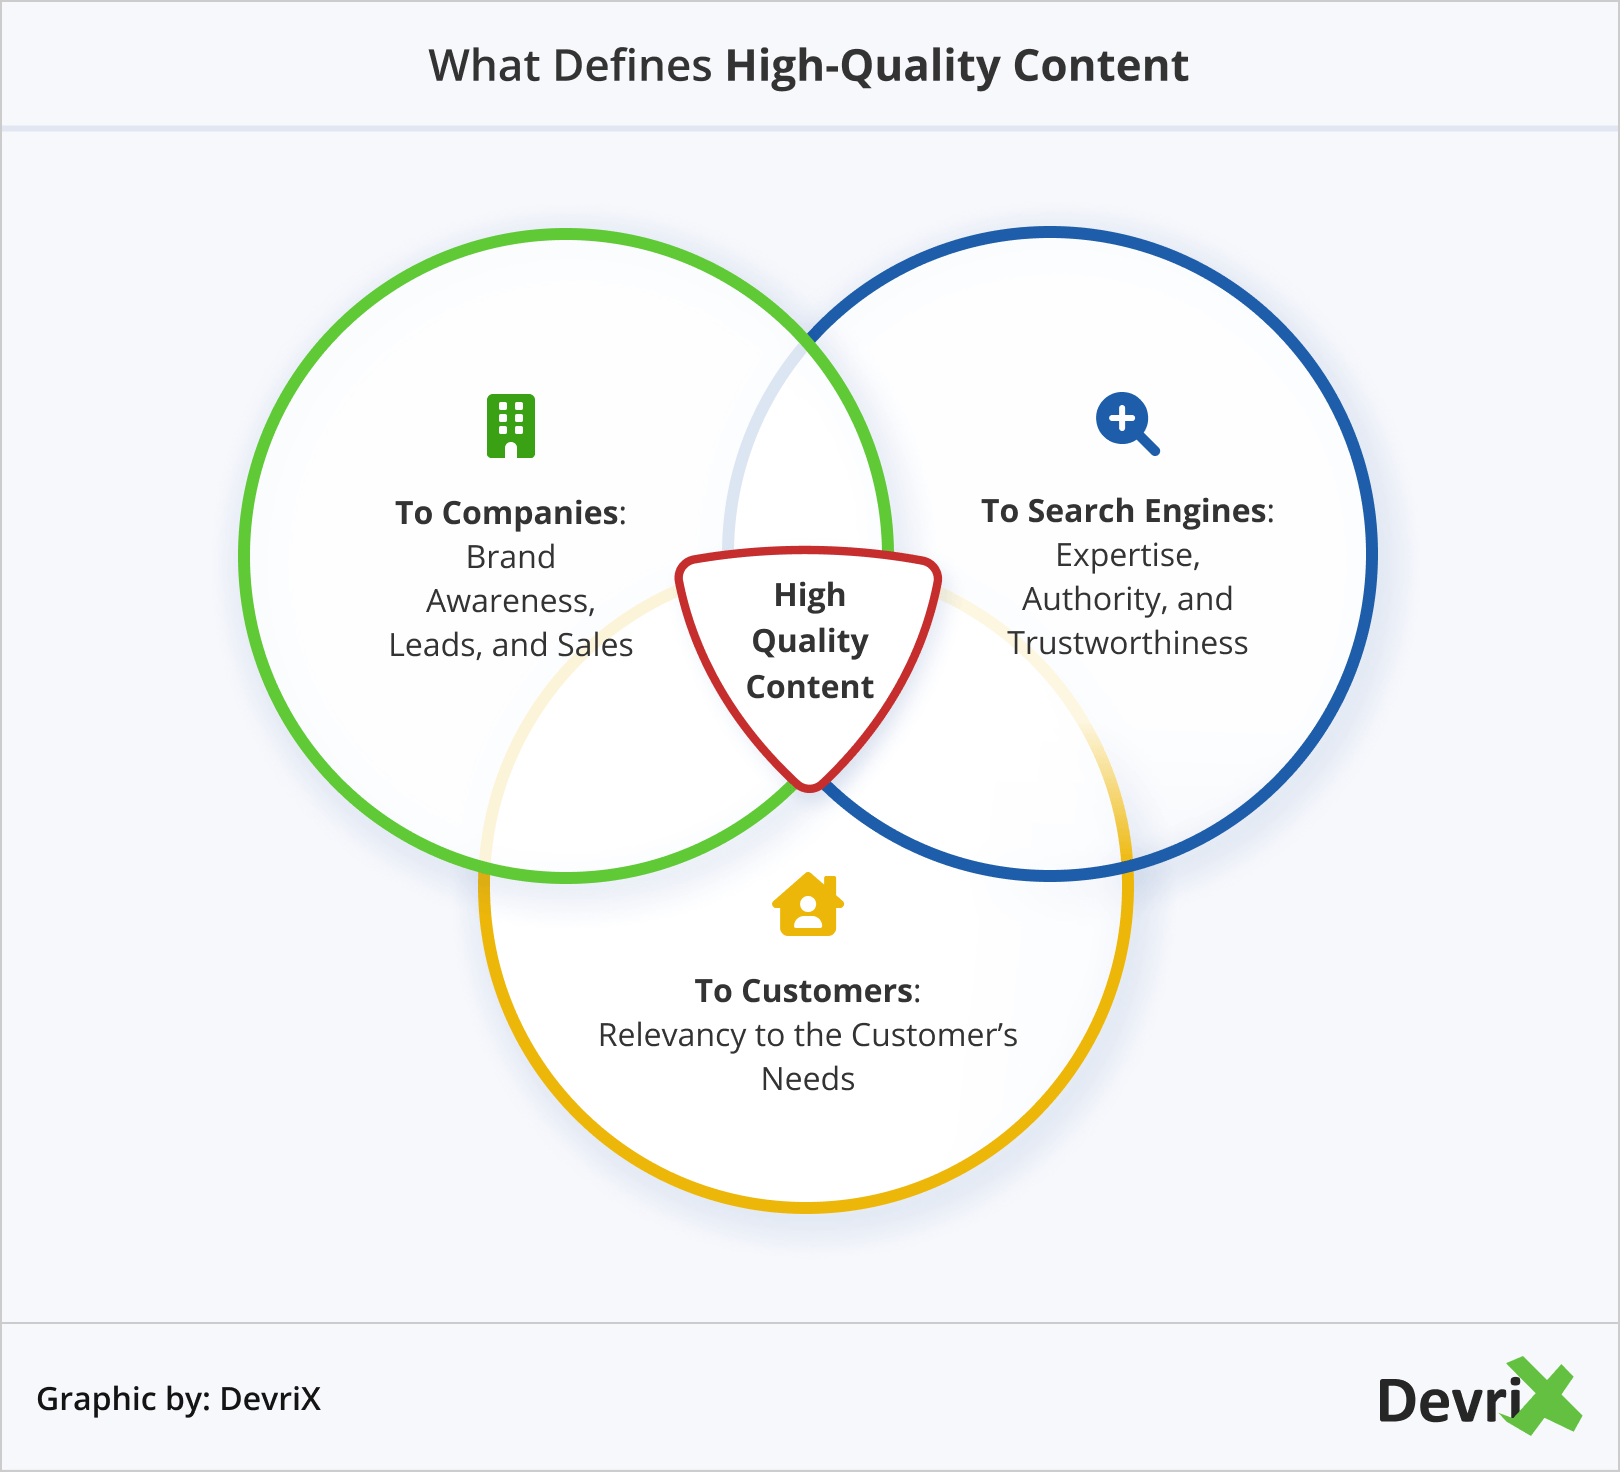 What Defines High-Quality Content